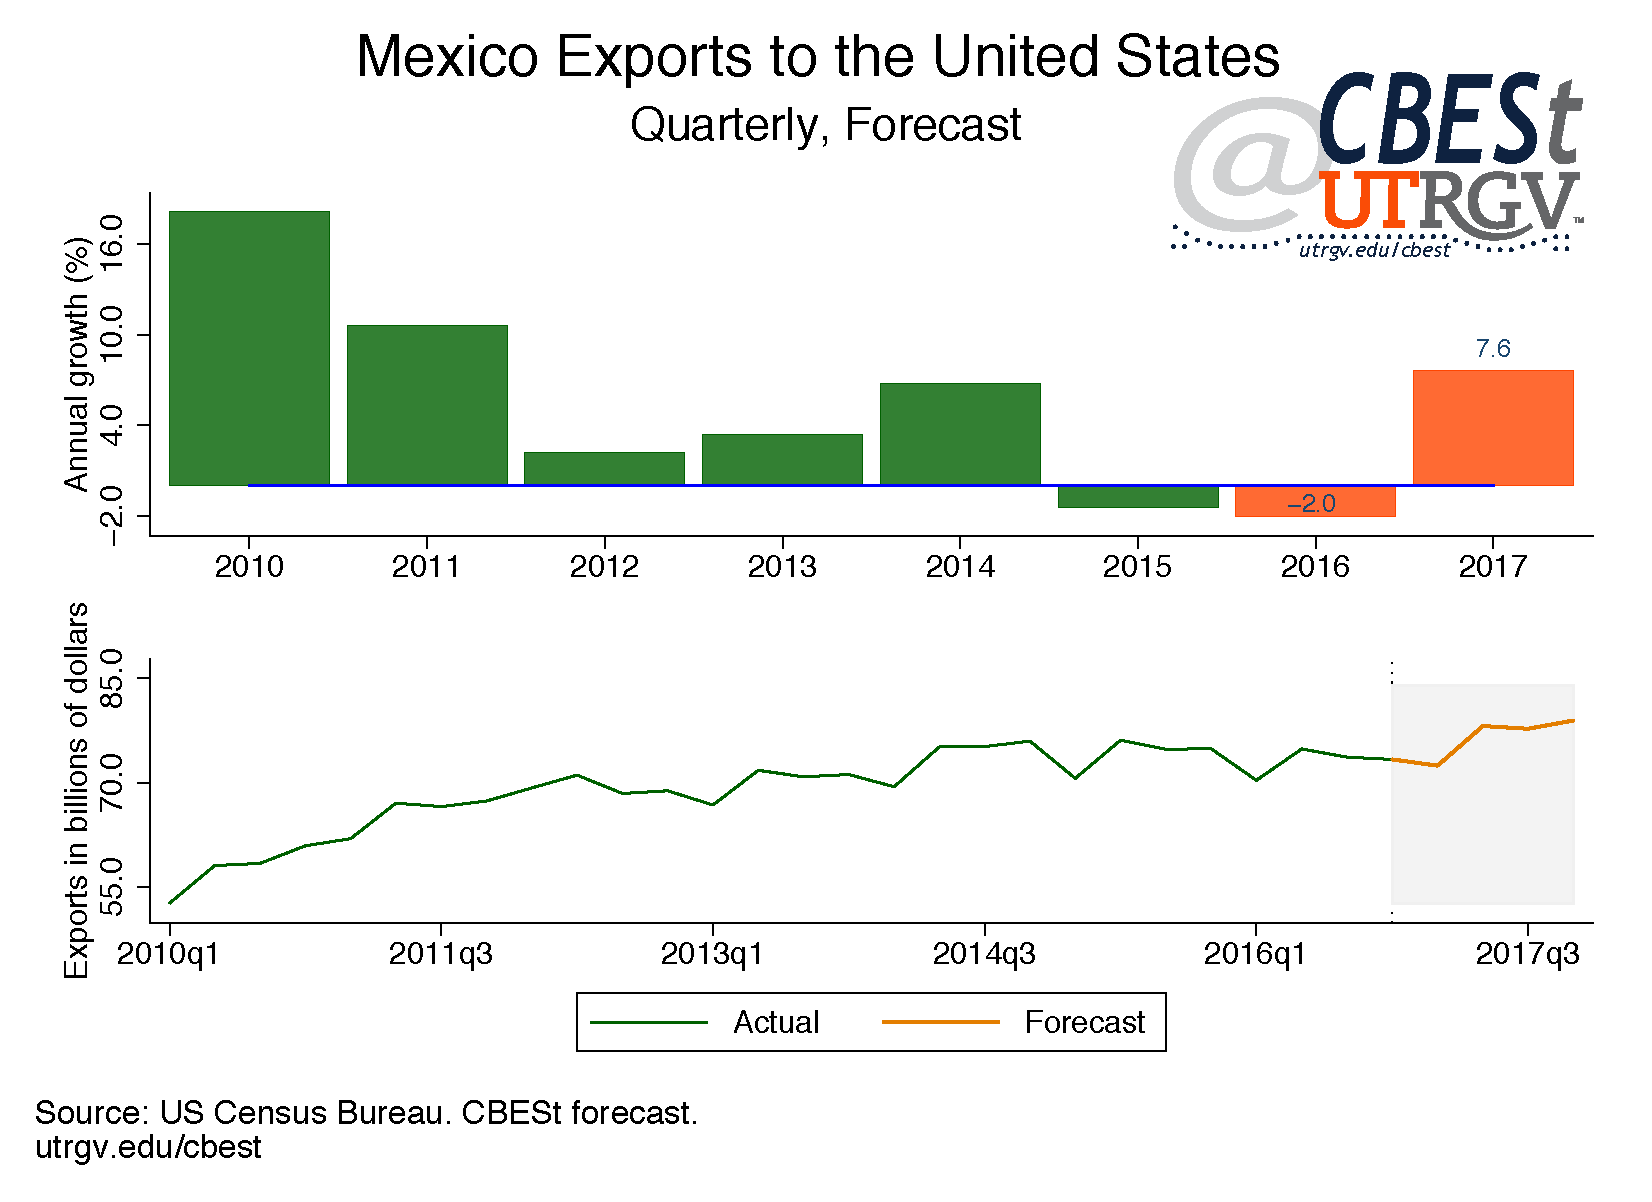 Mexico exports to the United States